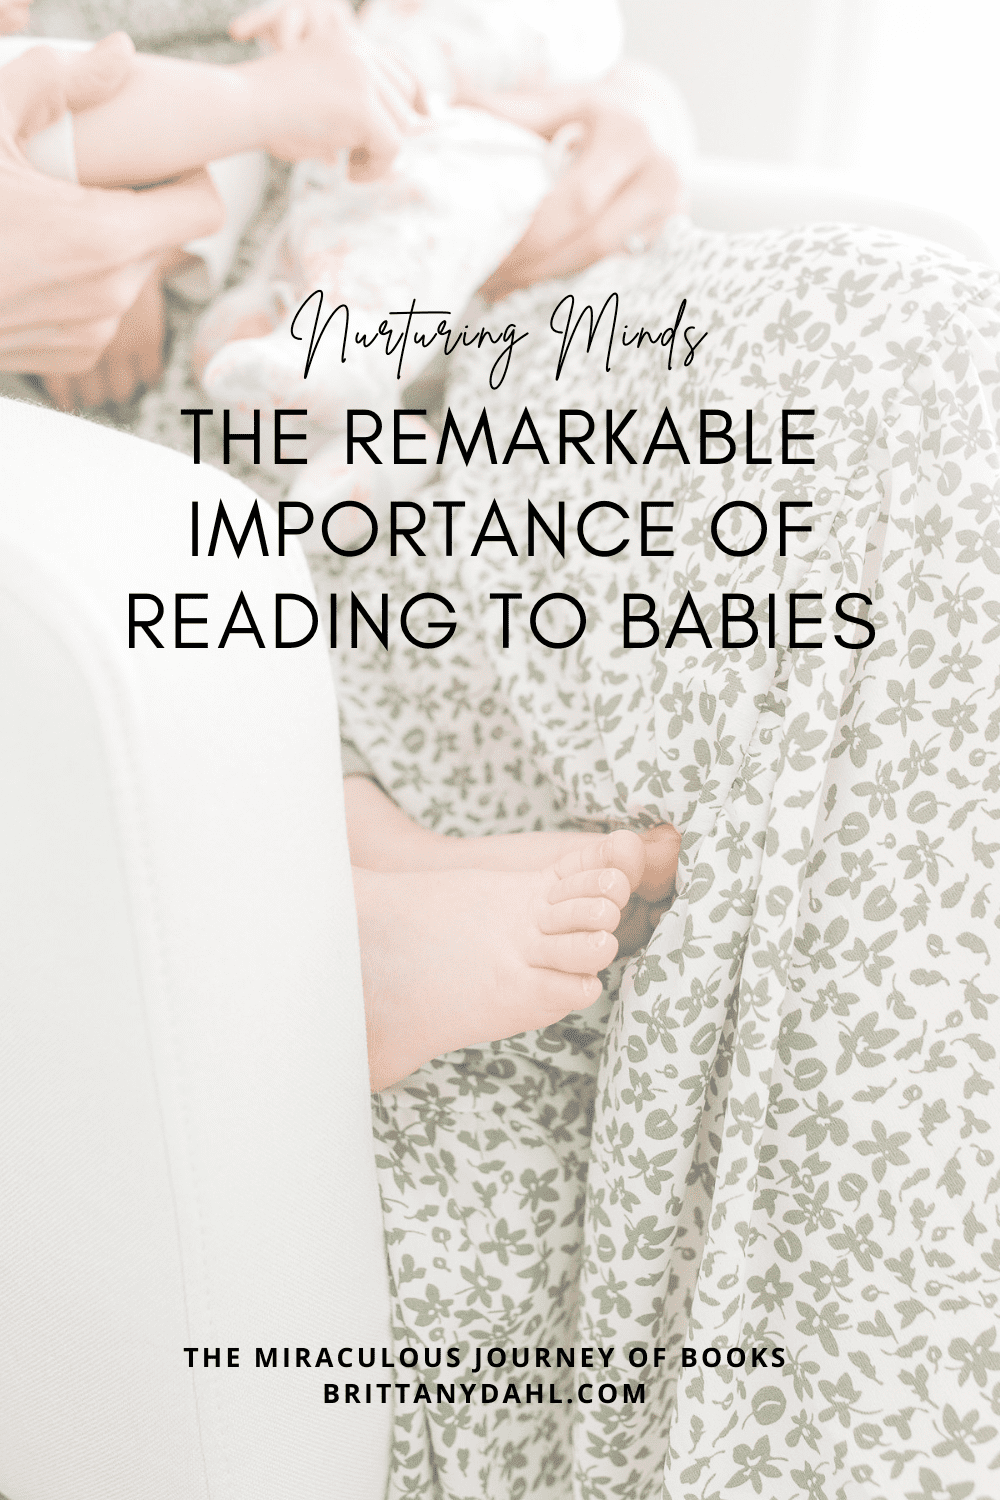 Nurturing Minds: the remarkable importance of reading to babies. A blog post from The Miraculous Journey of Books at Brittanydahl.com